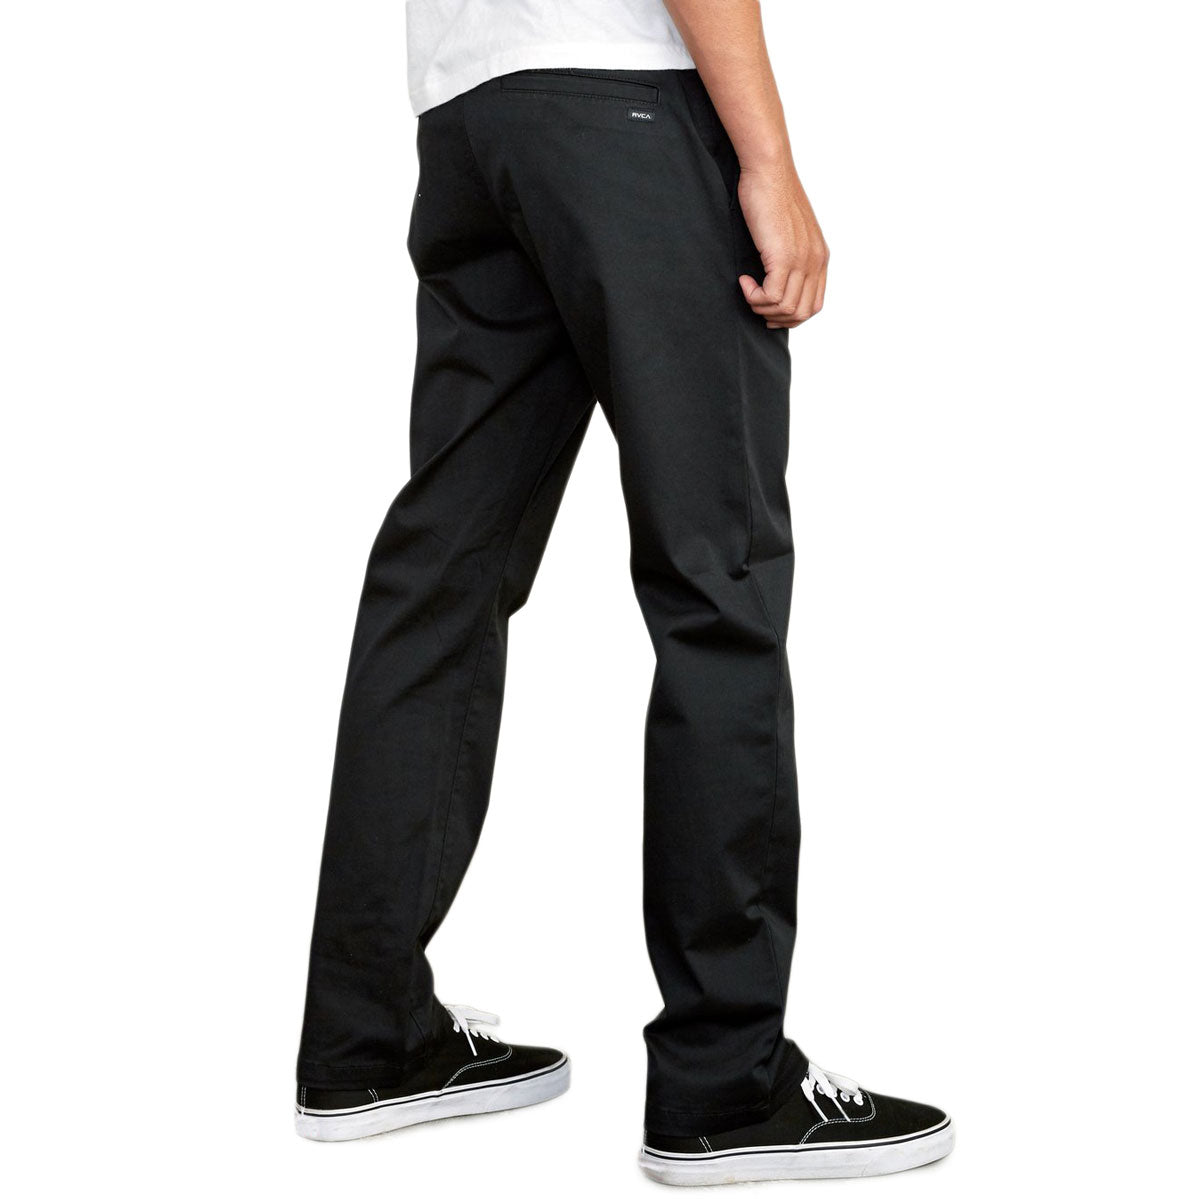 RVCA The Weekend Stretch Pants - Black image 3